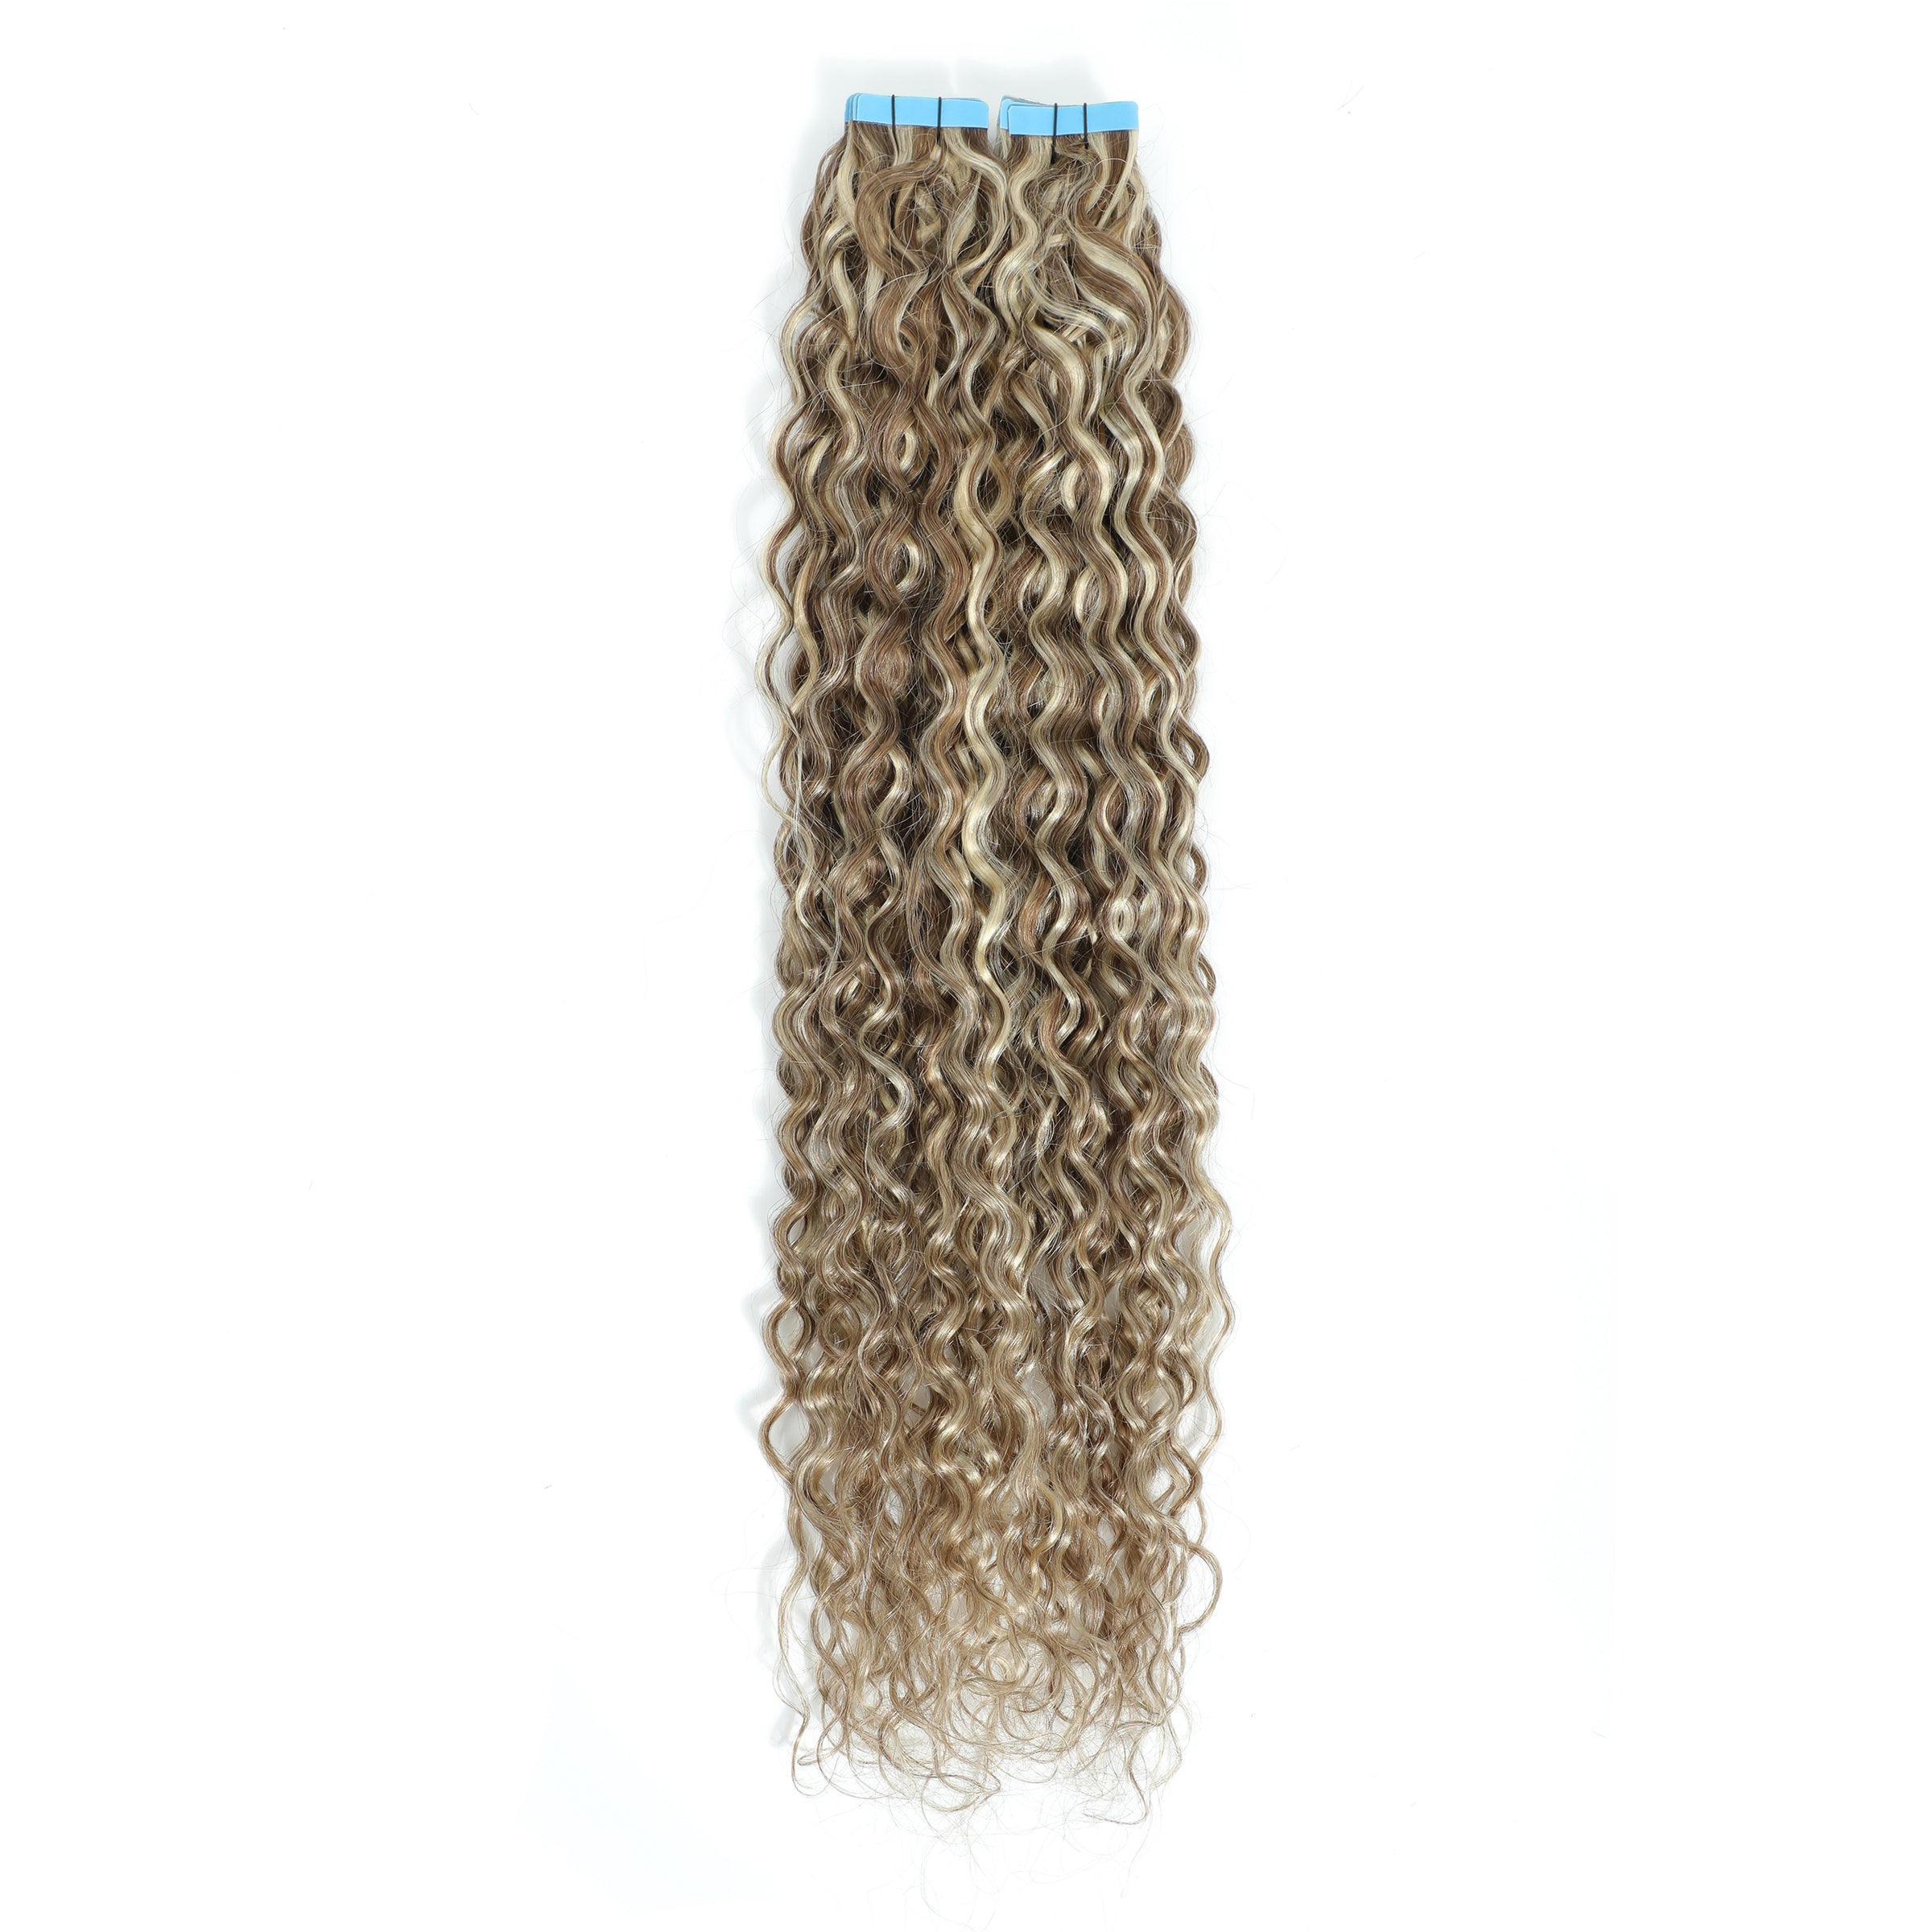 Curly Tape Hair Extensions 3B  #8/60 Brown & Platinum Blonde Highlights